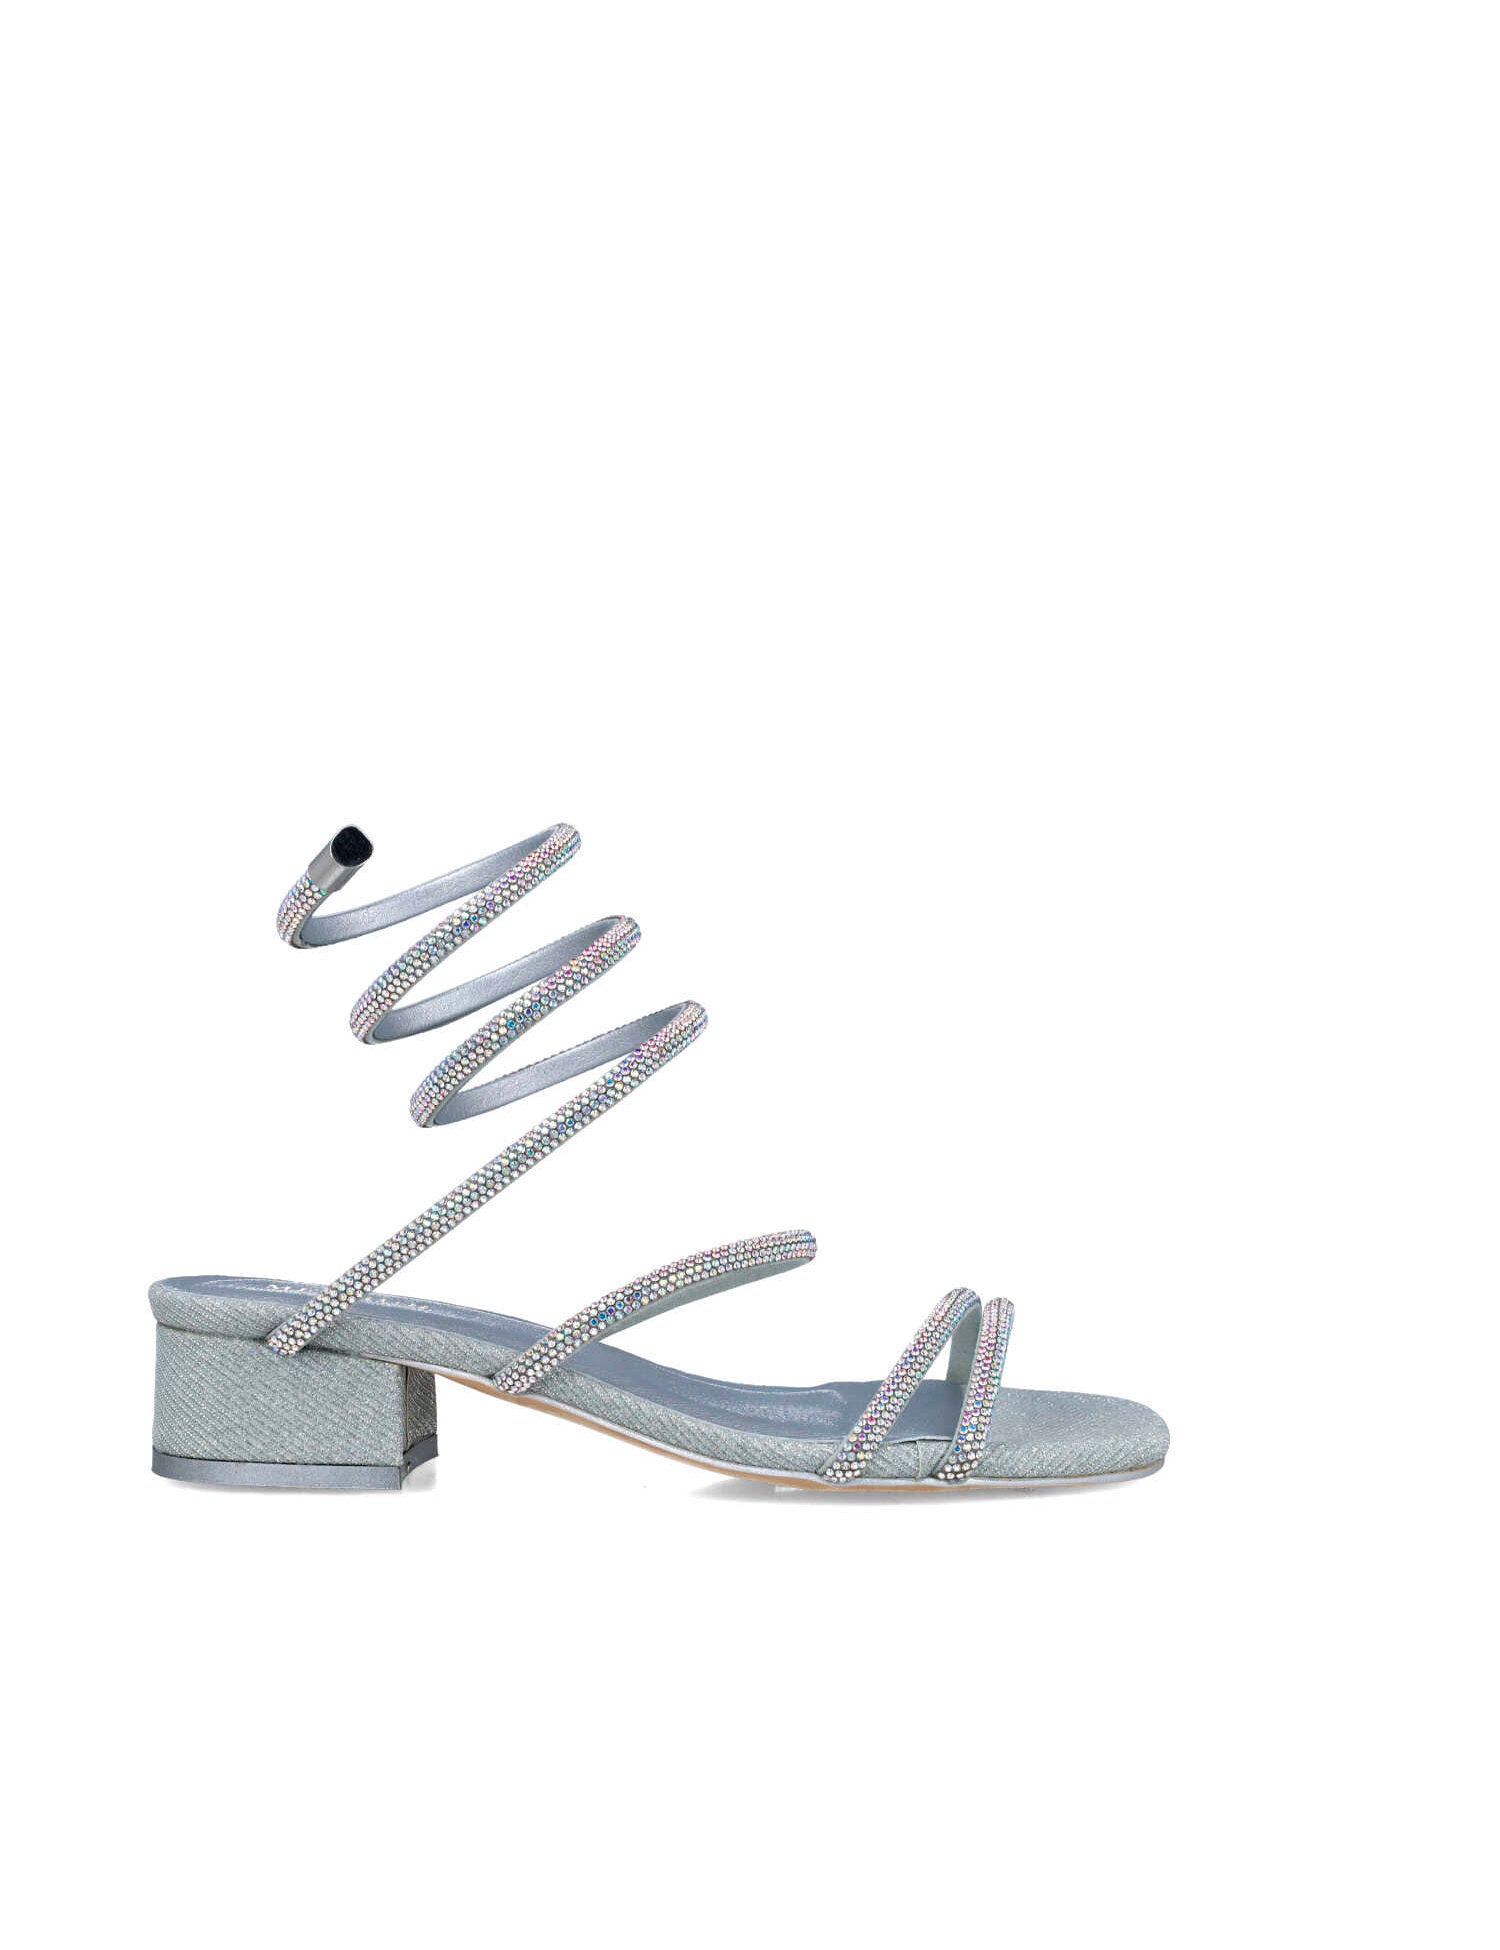 Silver Slippers With Embellished Wrap Strap_24722_09_01